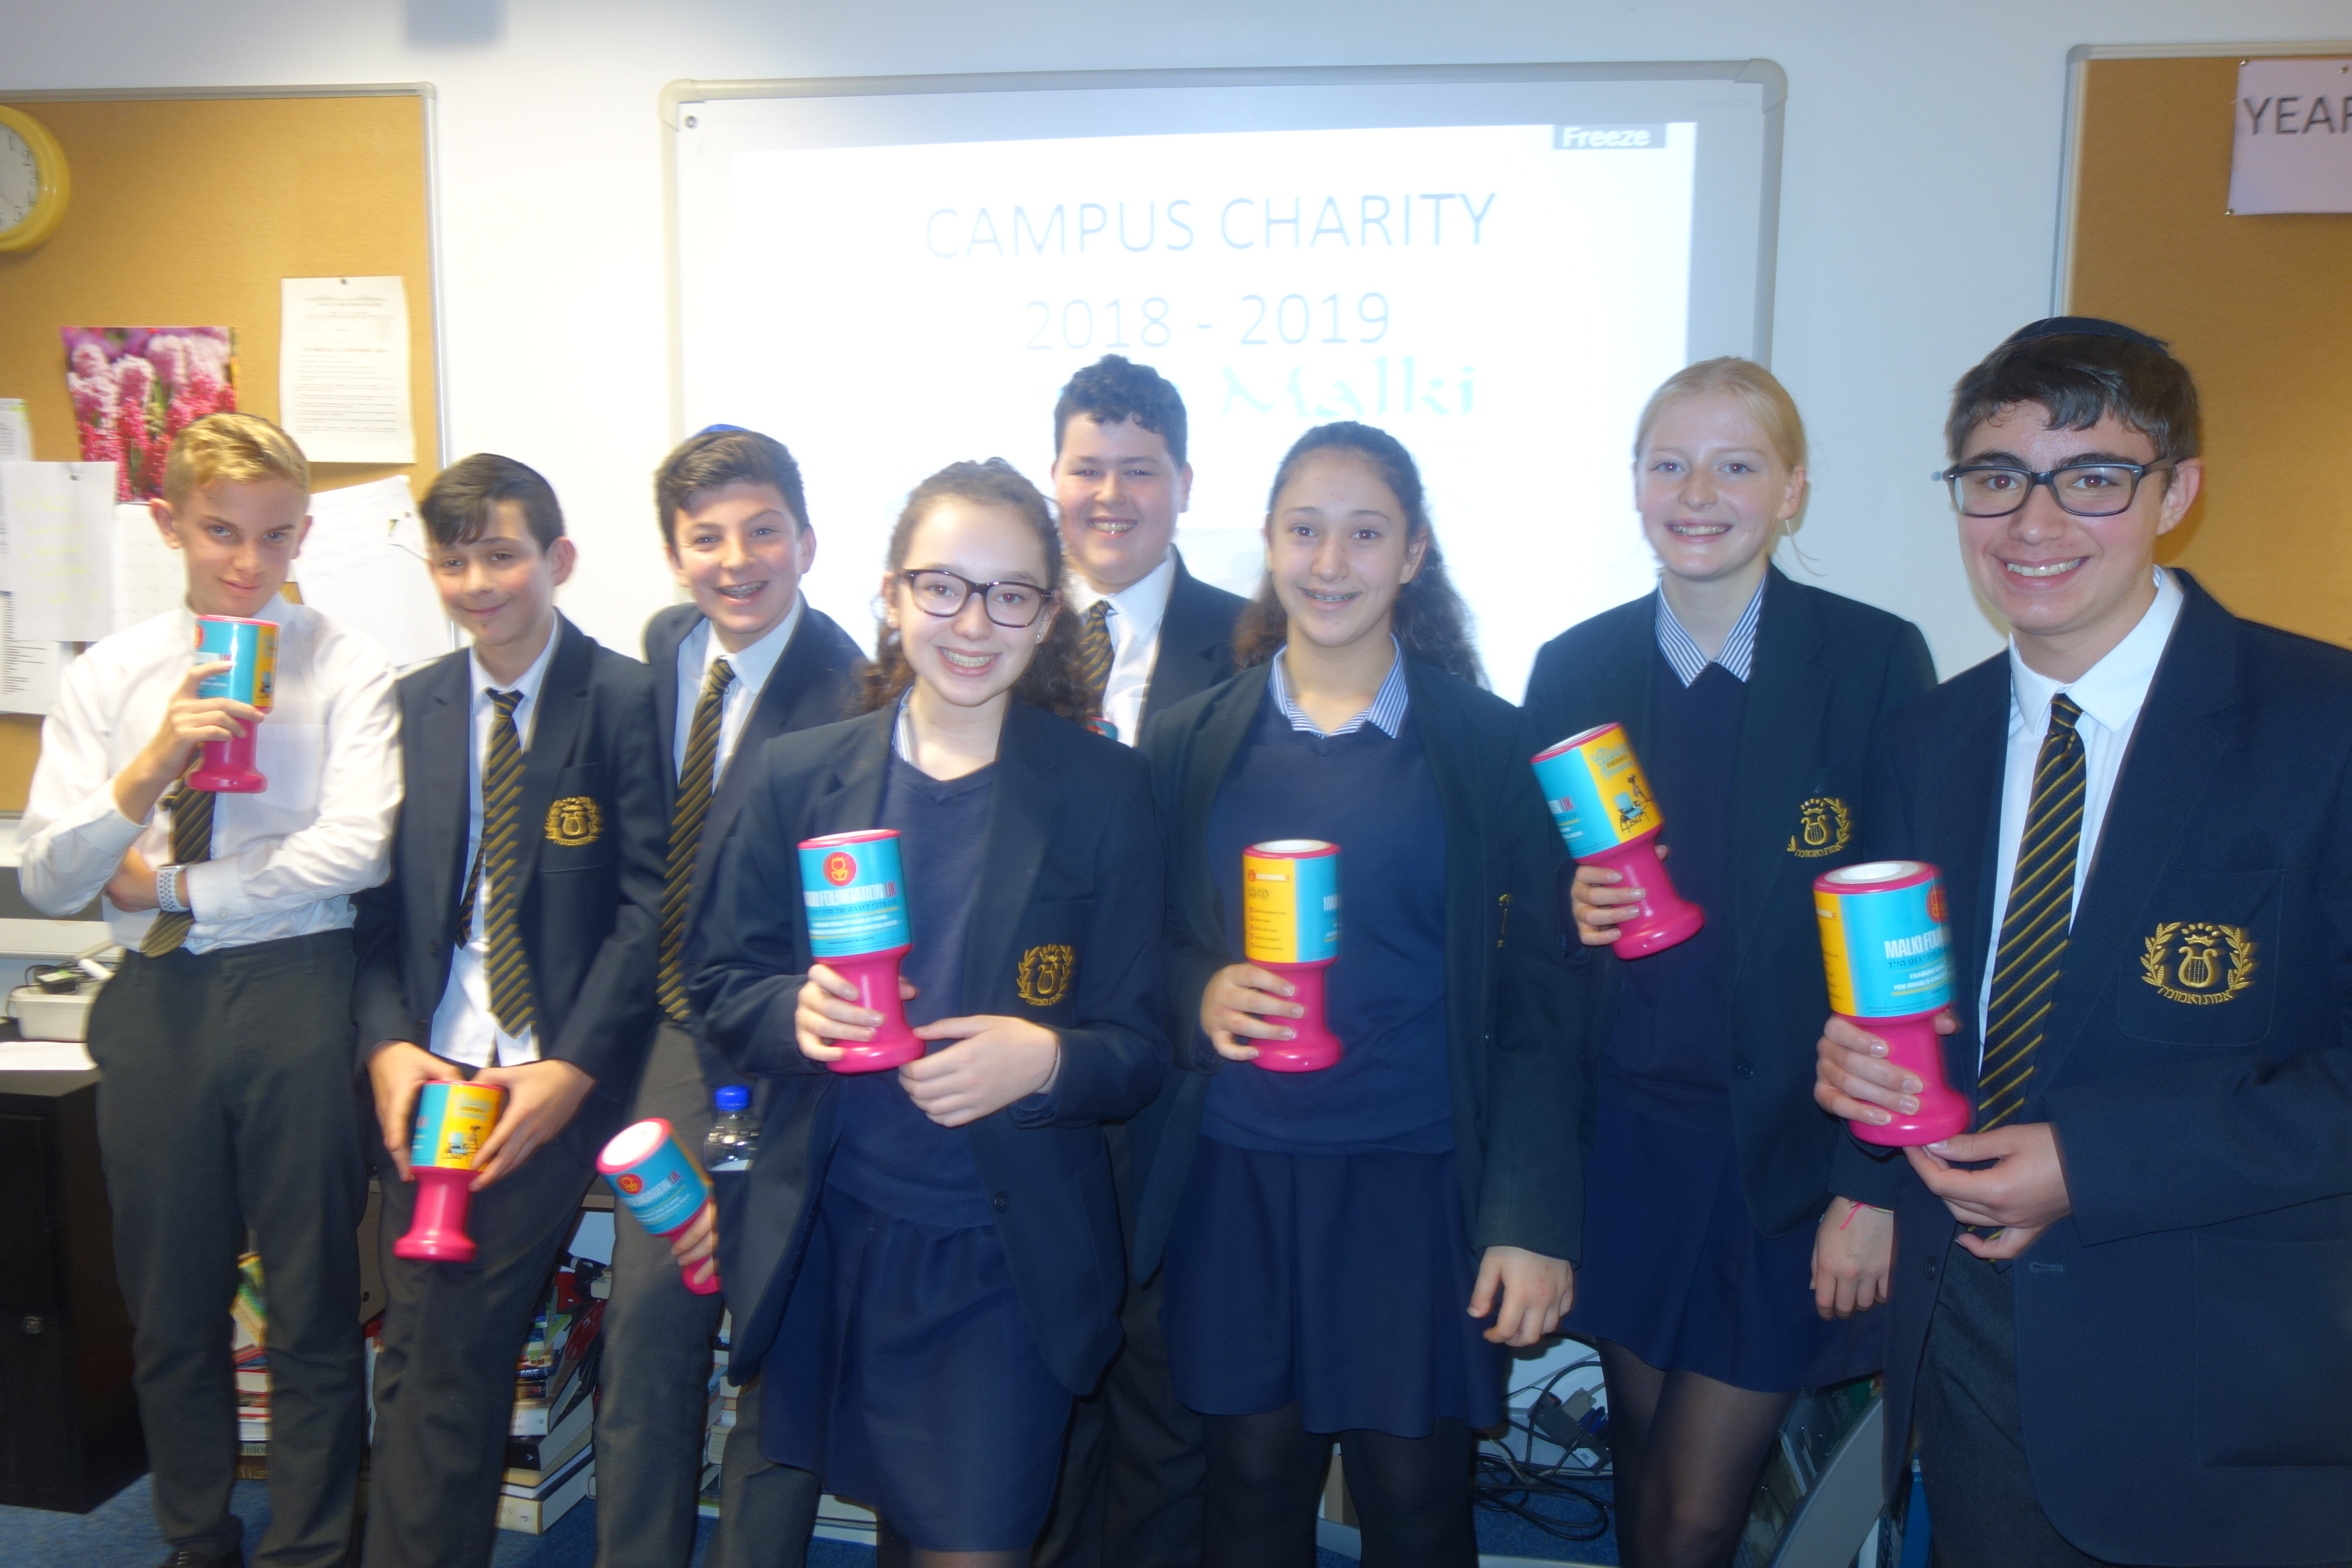 Students holding charity bins